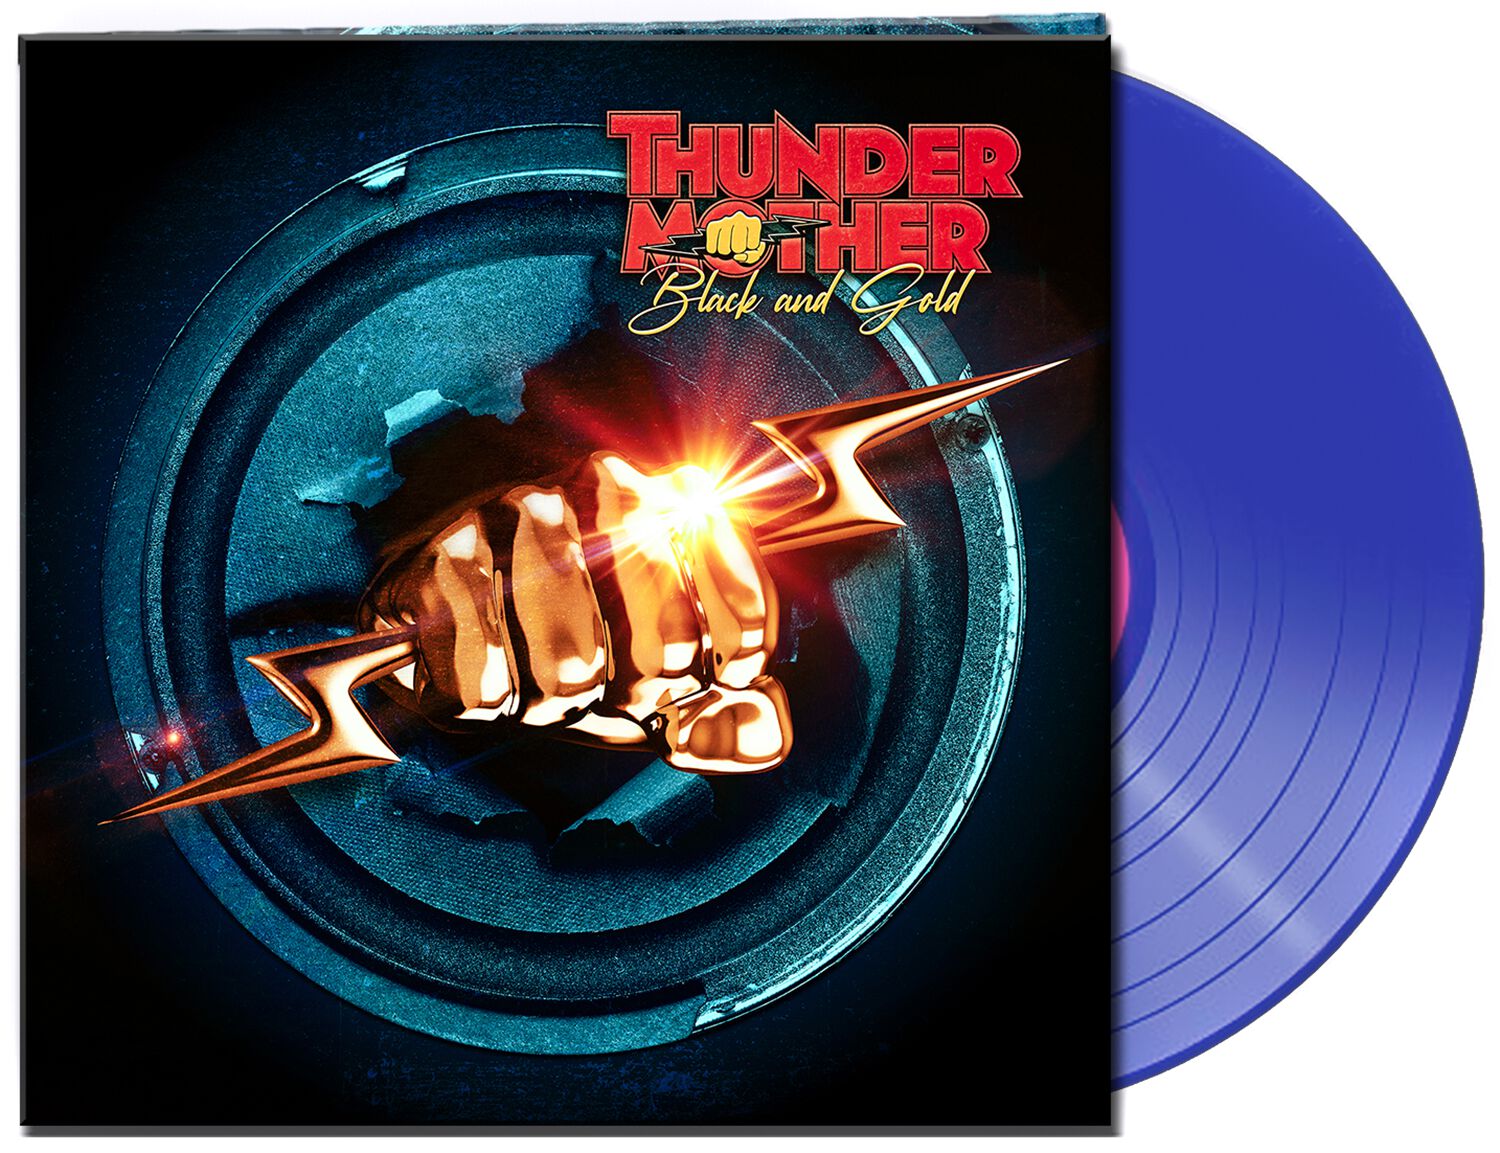 Thundermother Black and gold LP blue